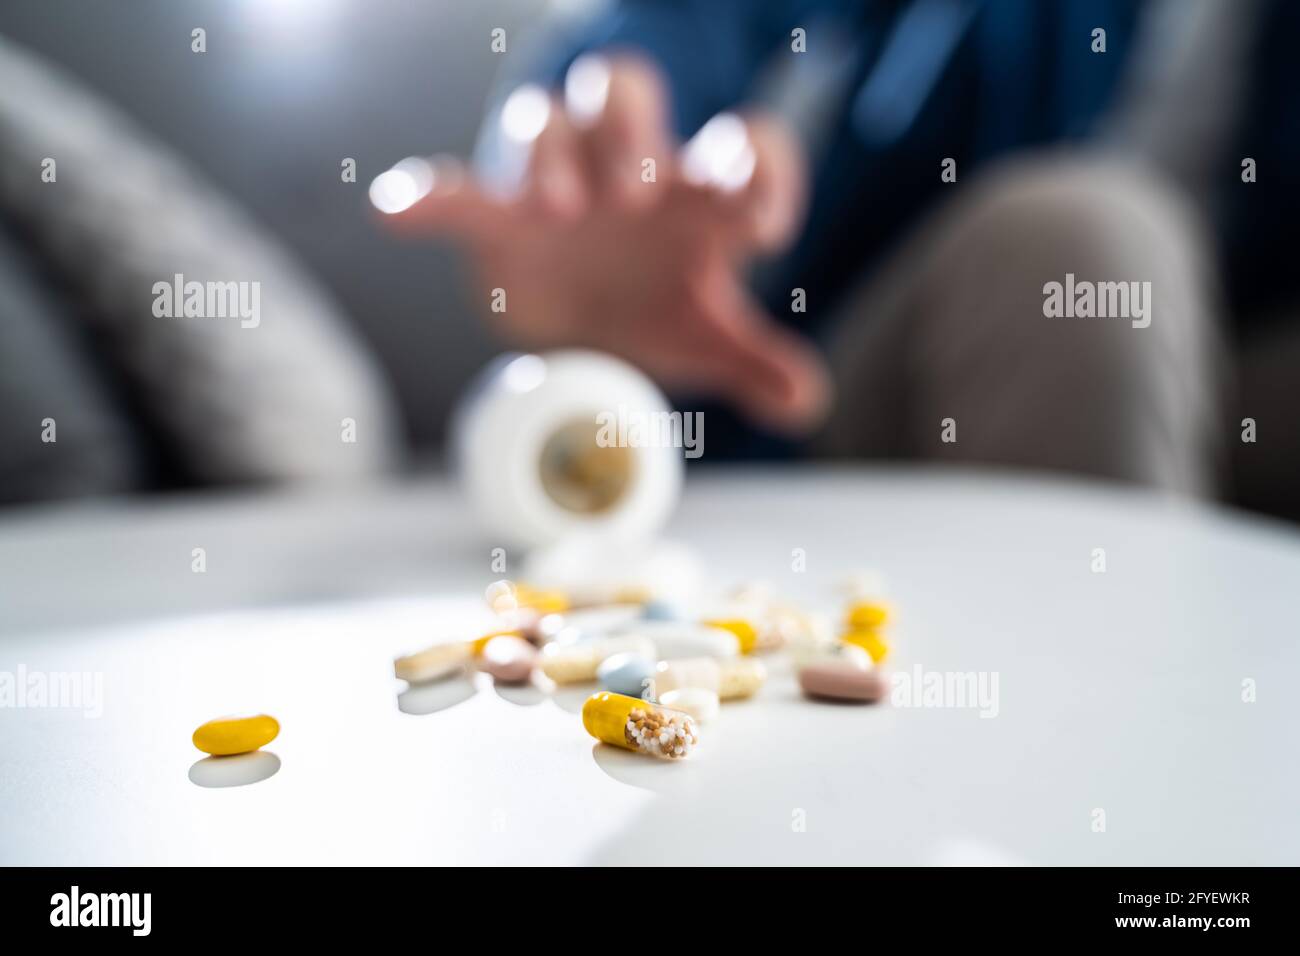 Opioid Withdrawal Symptoms And Depression. Bad Pain Medication Stock Photo